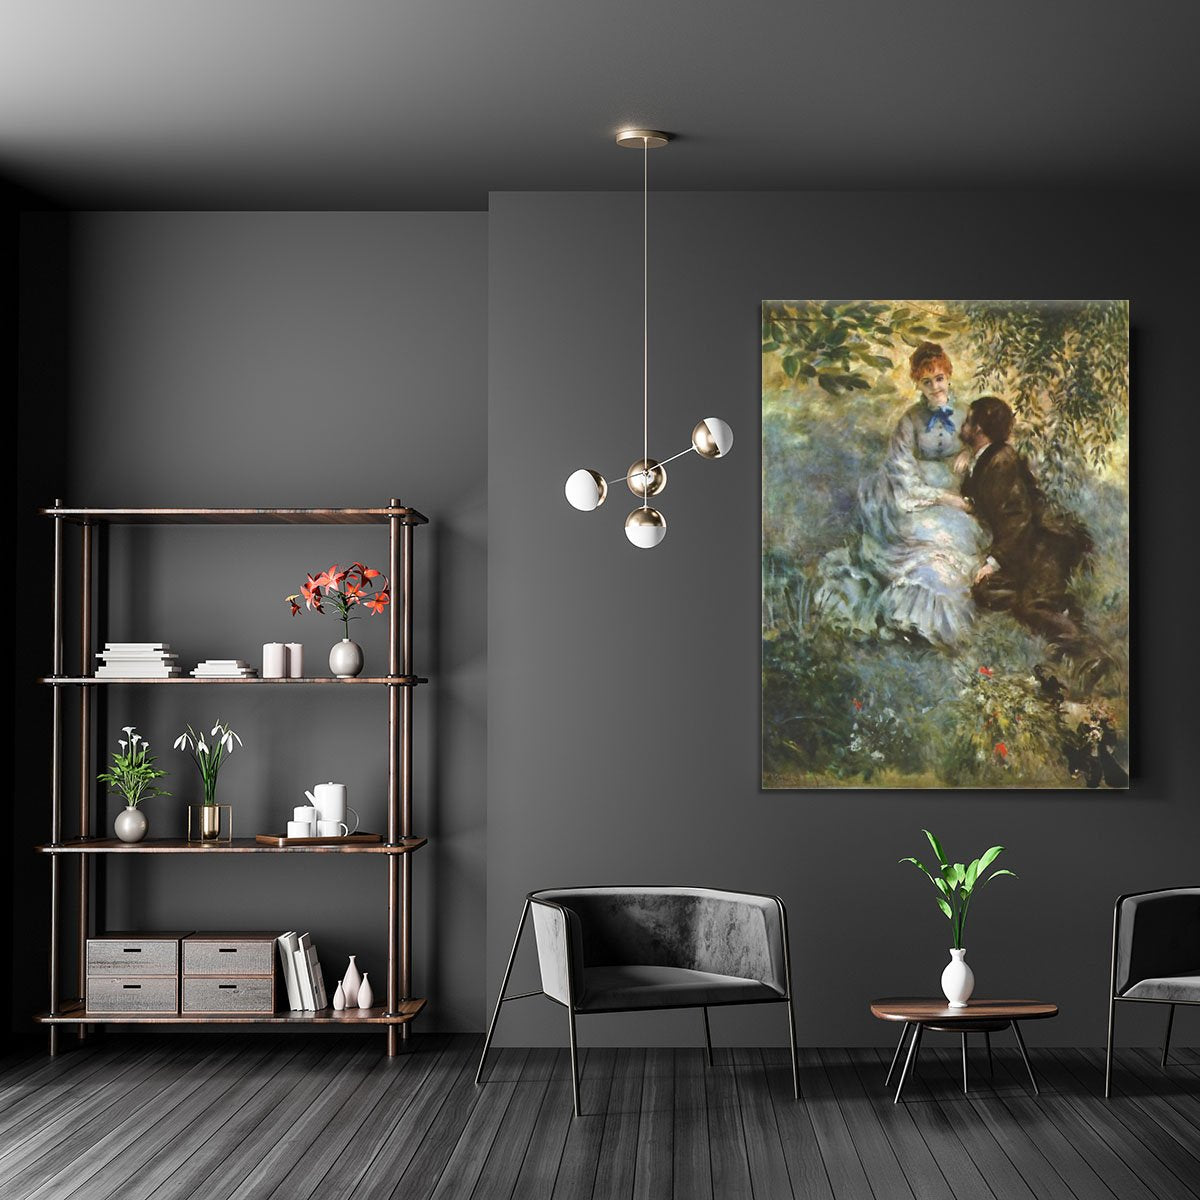 Pair of Lovers by Renoir Canvas Print or Poster